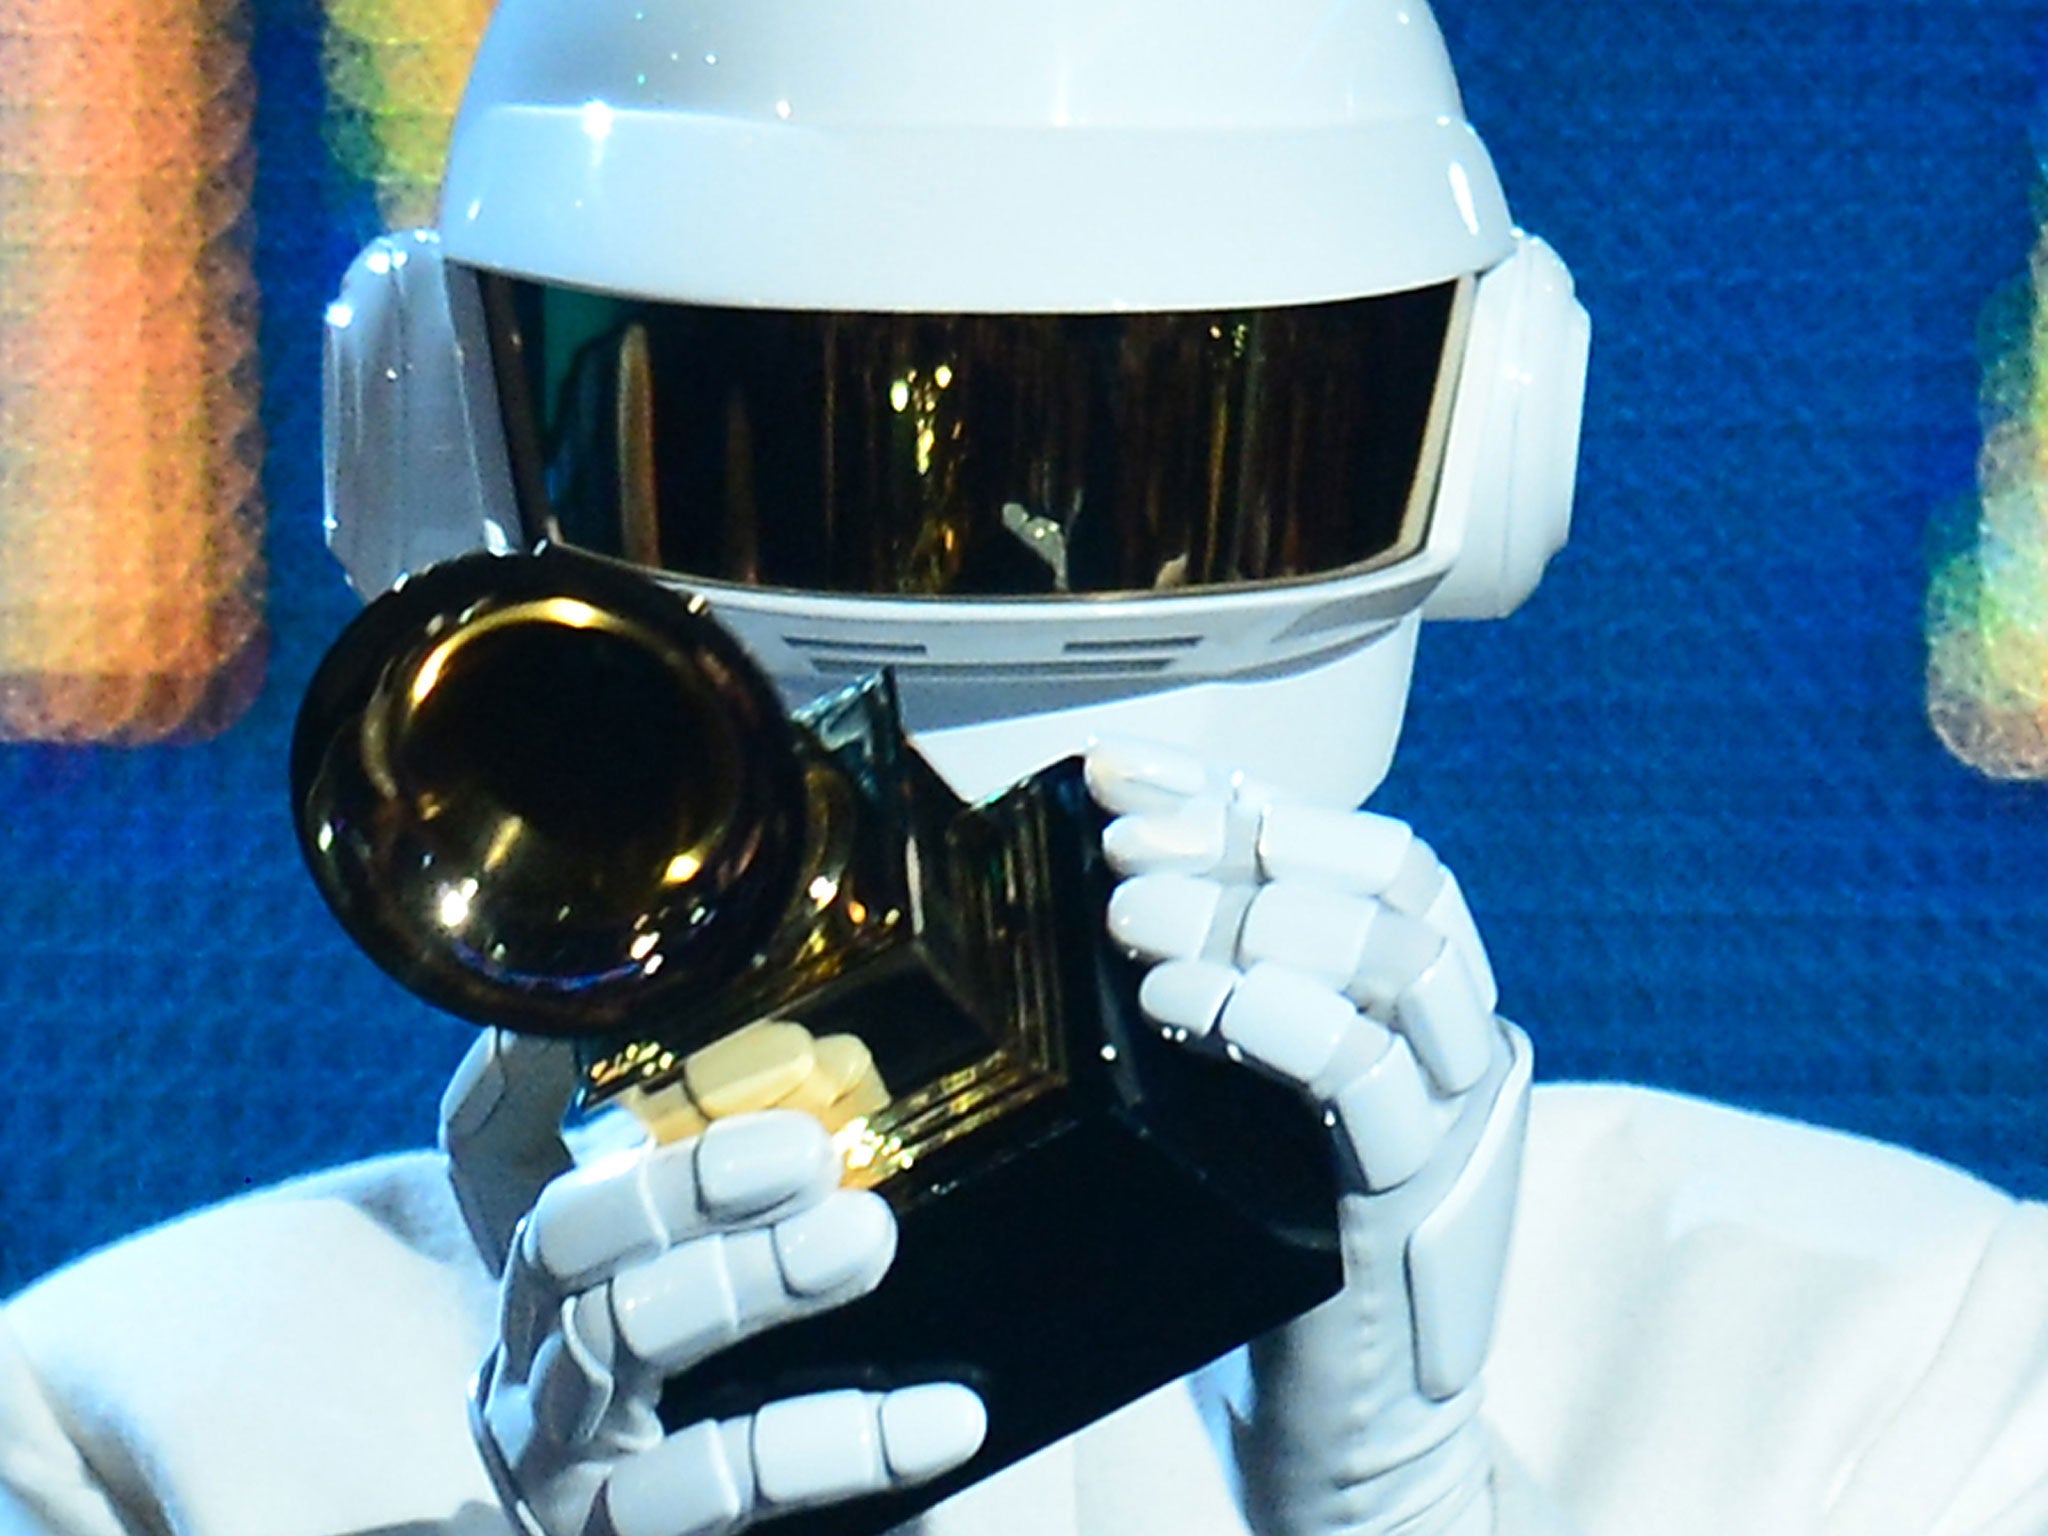 Daft Punk's electronic-funk grooves have won big at the Grammys